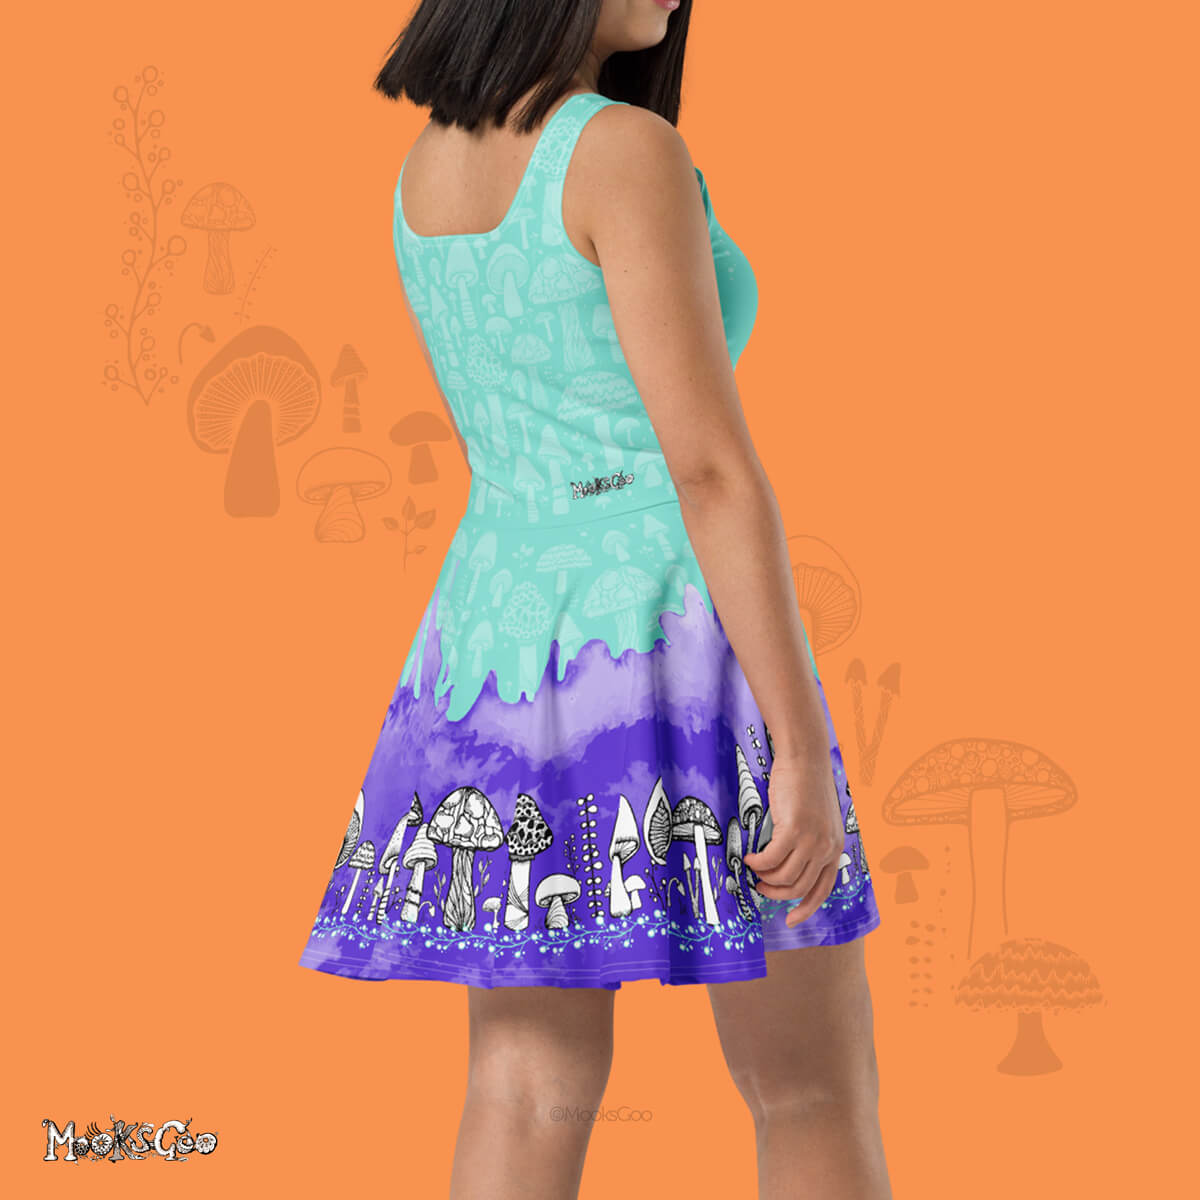 Right side view of a autumnal quirky mushroom style dress that twists and flares like a tennis skirt. Designed and illustrated by MooksGoo